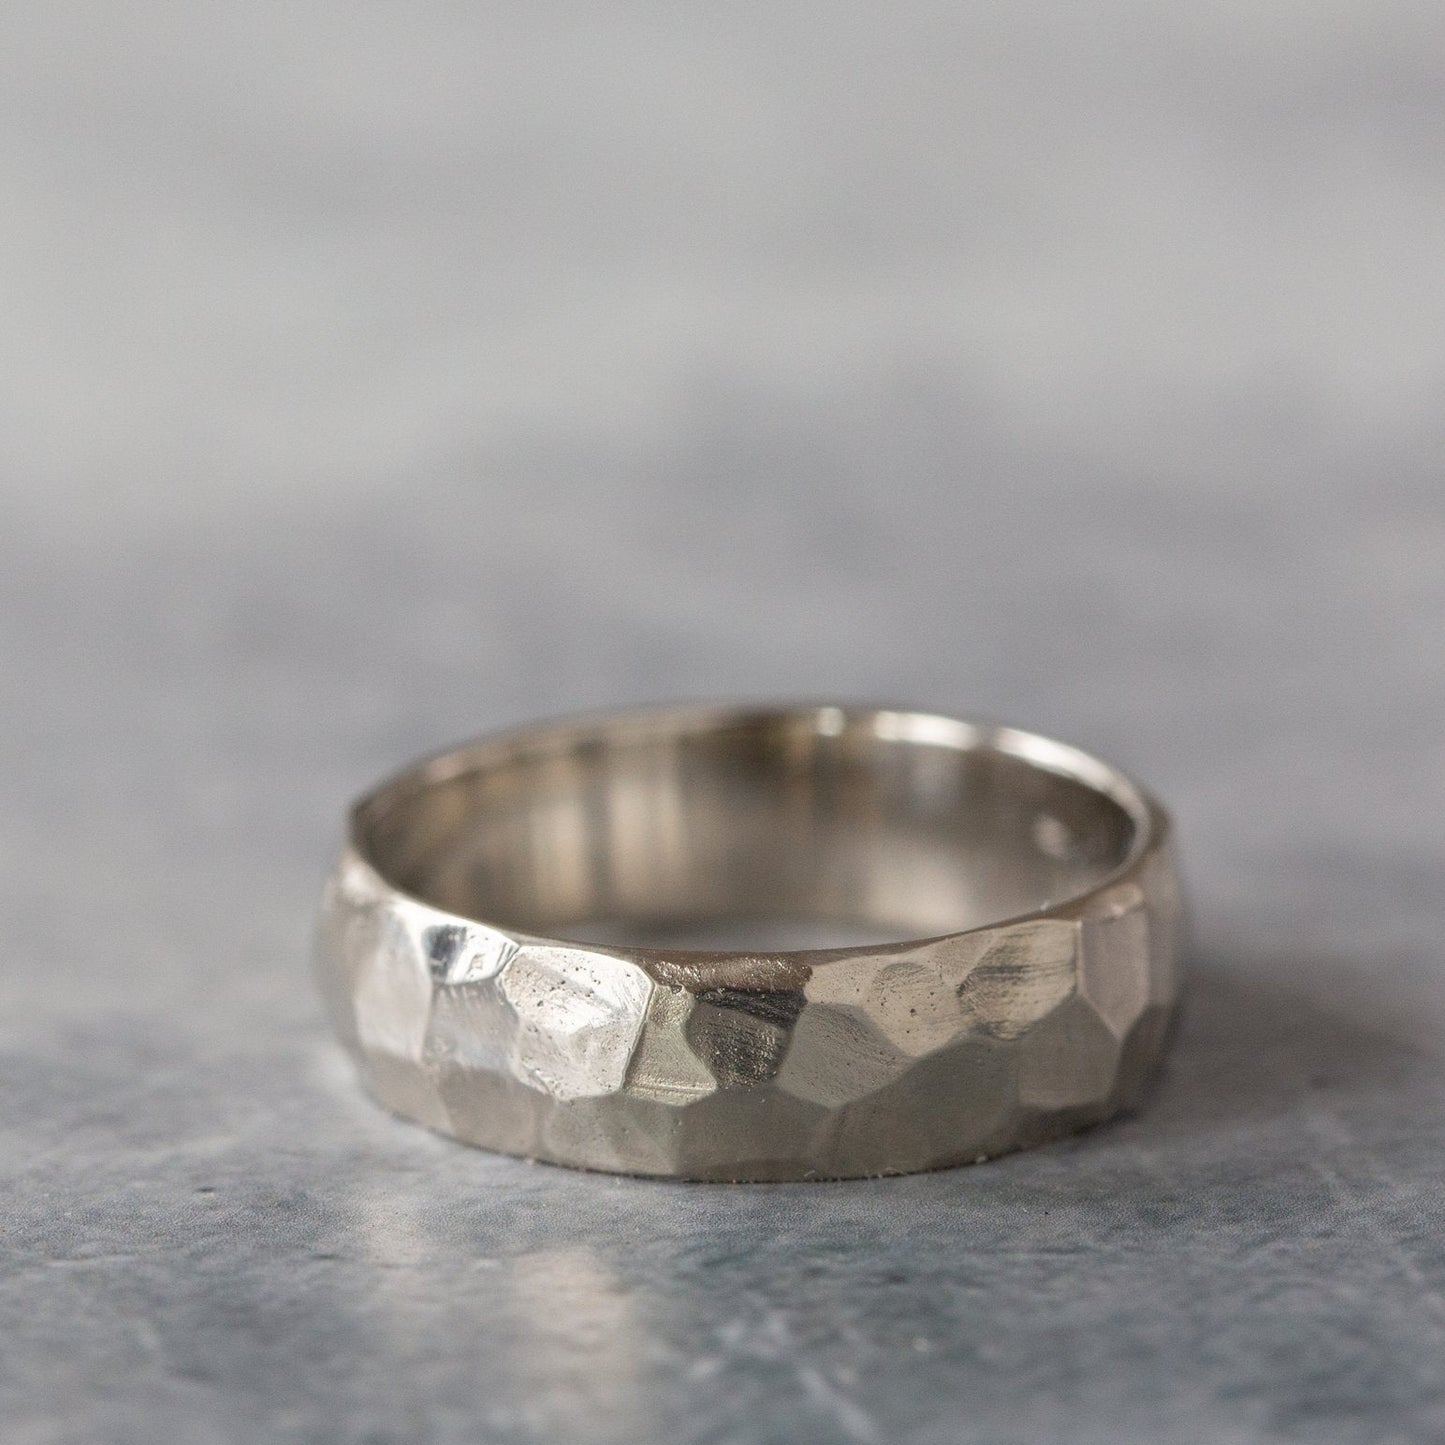 The Carved Band (Ready to ship in 4.5mm width in 14K white gold size 4.75) - W.R. Metalarts